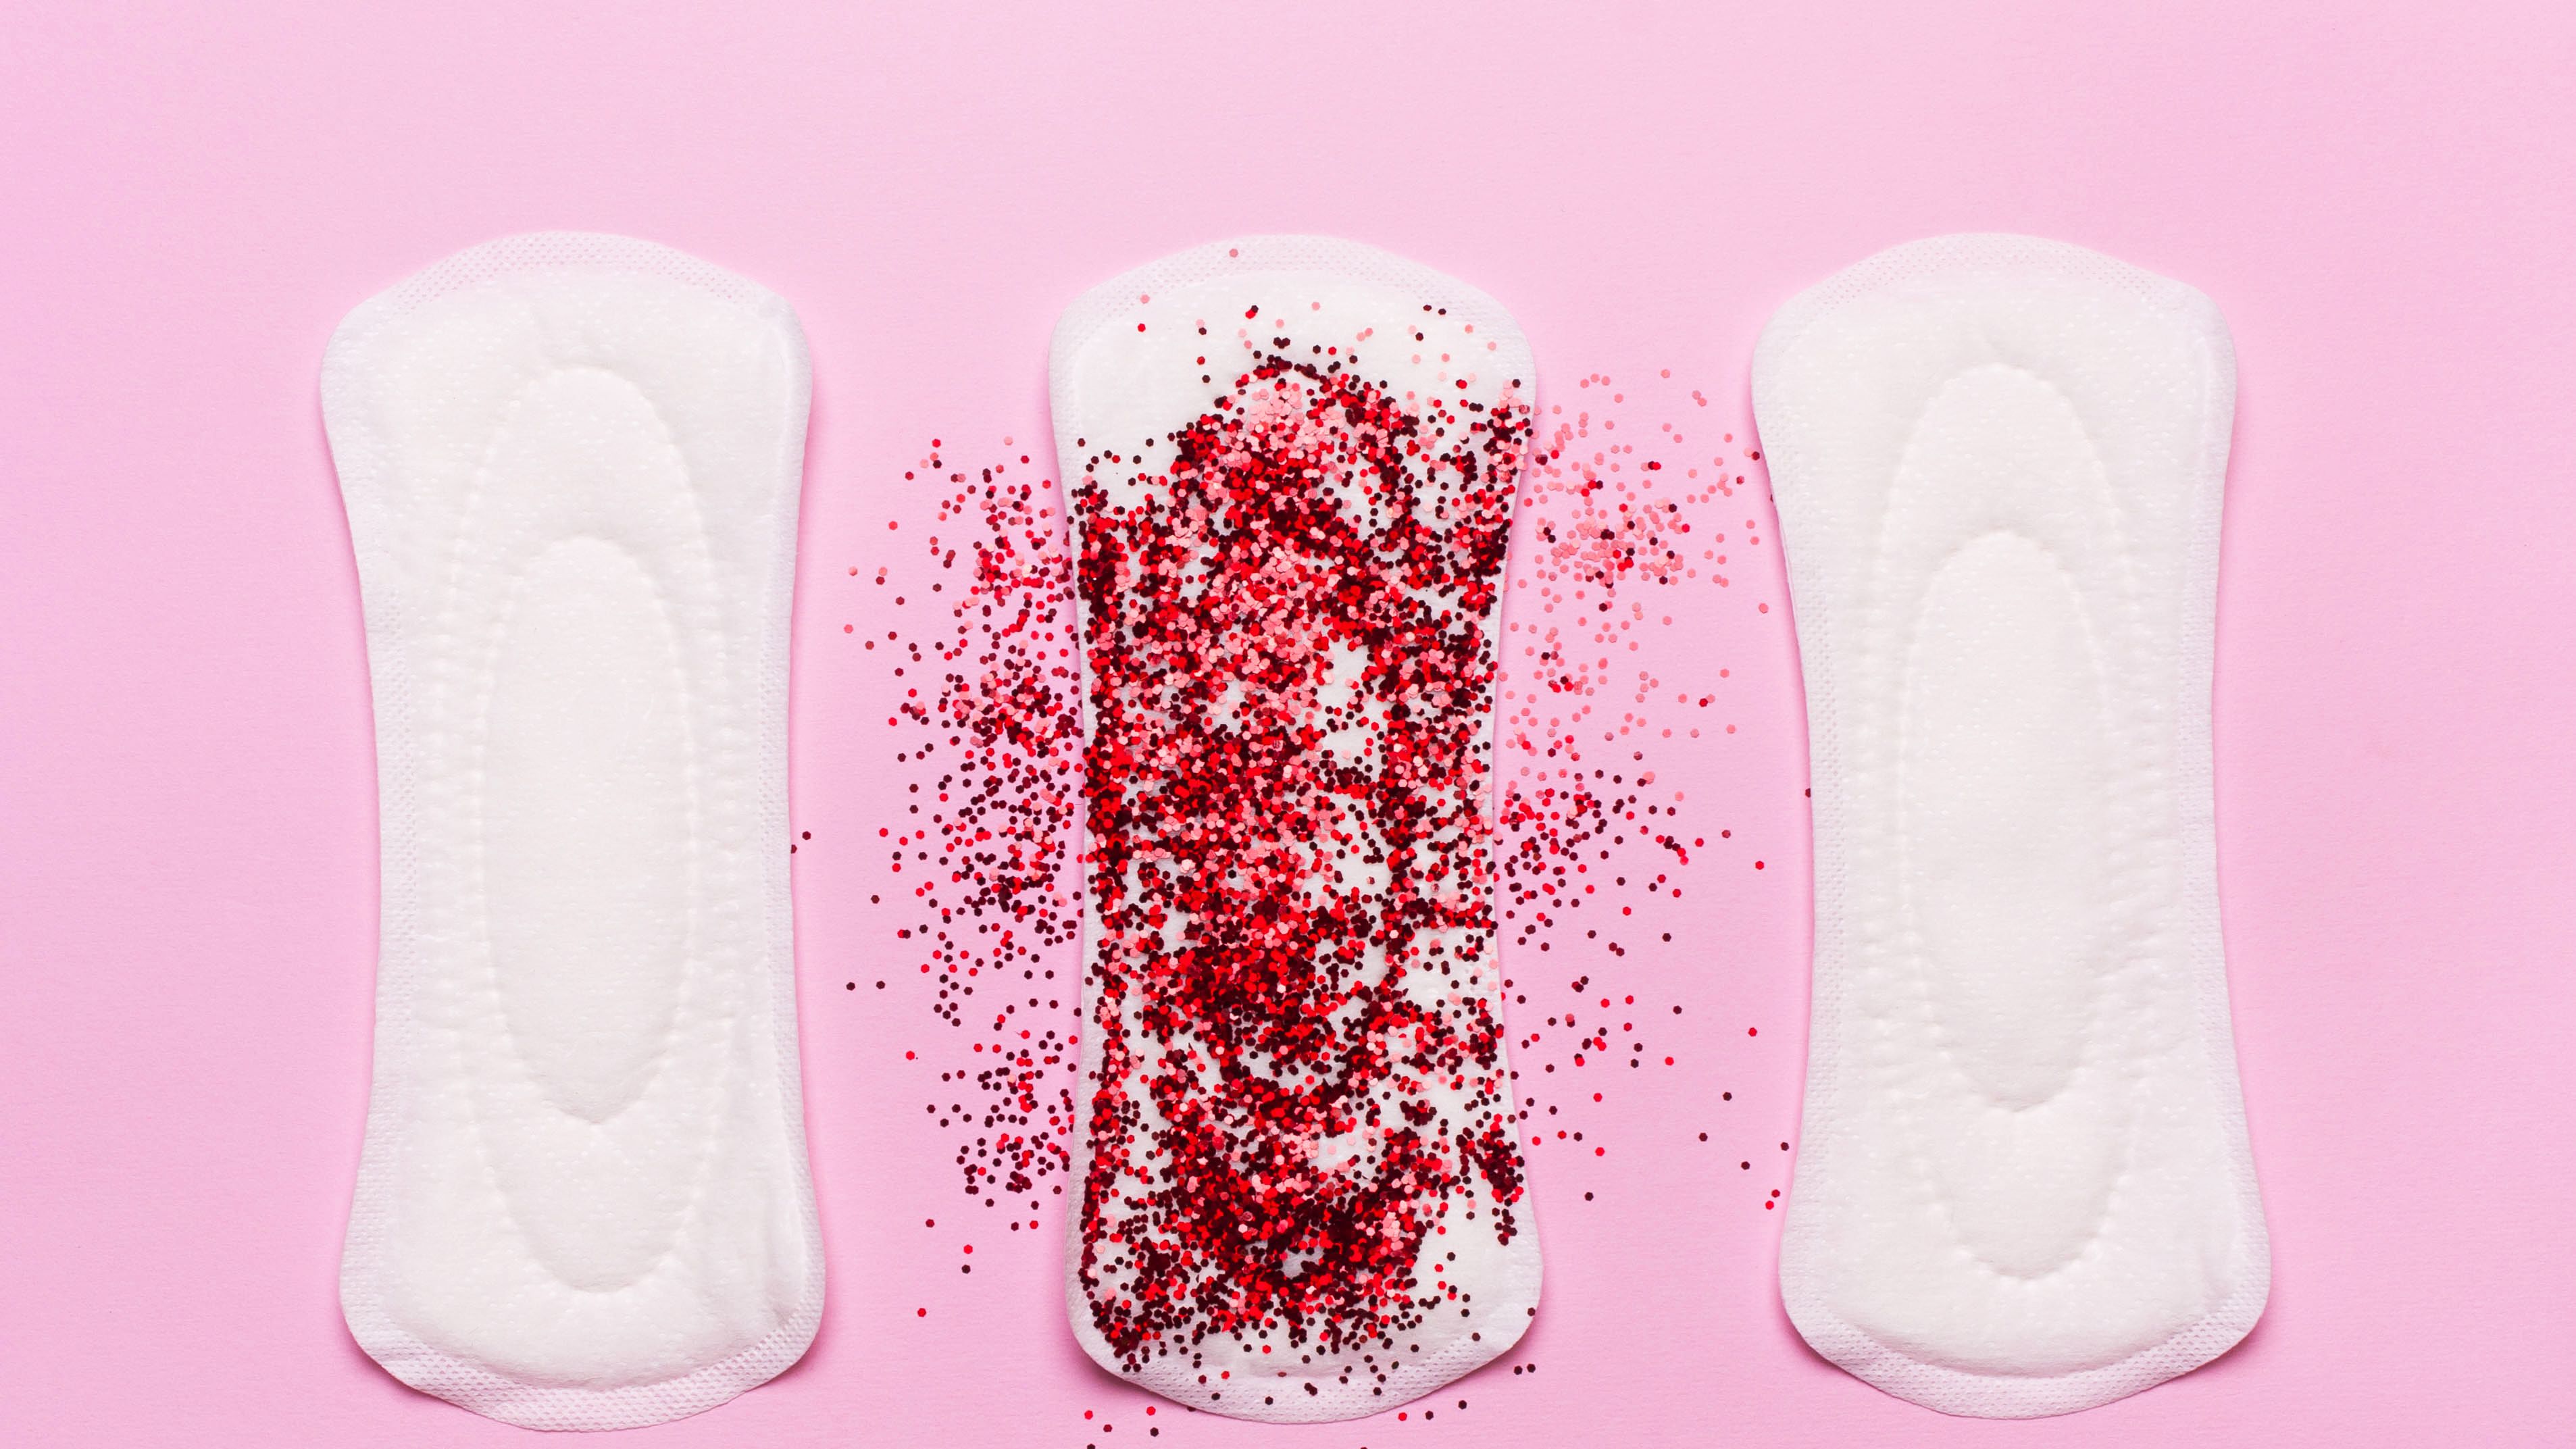 What are the black dots on my pad during my period from? - Quora